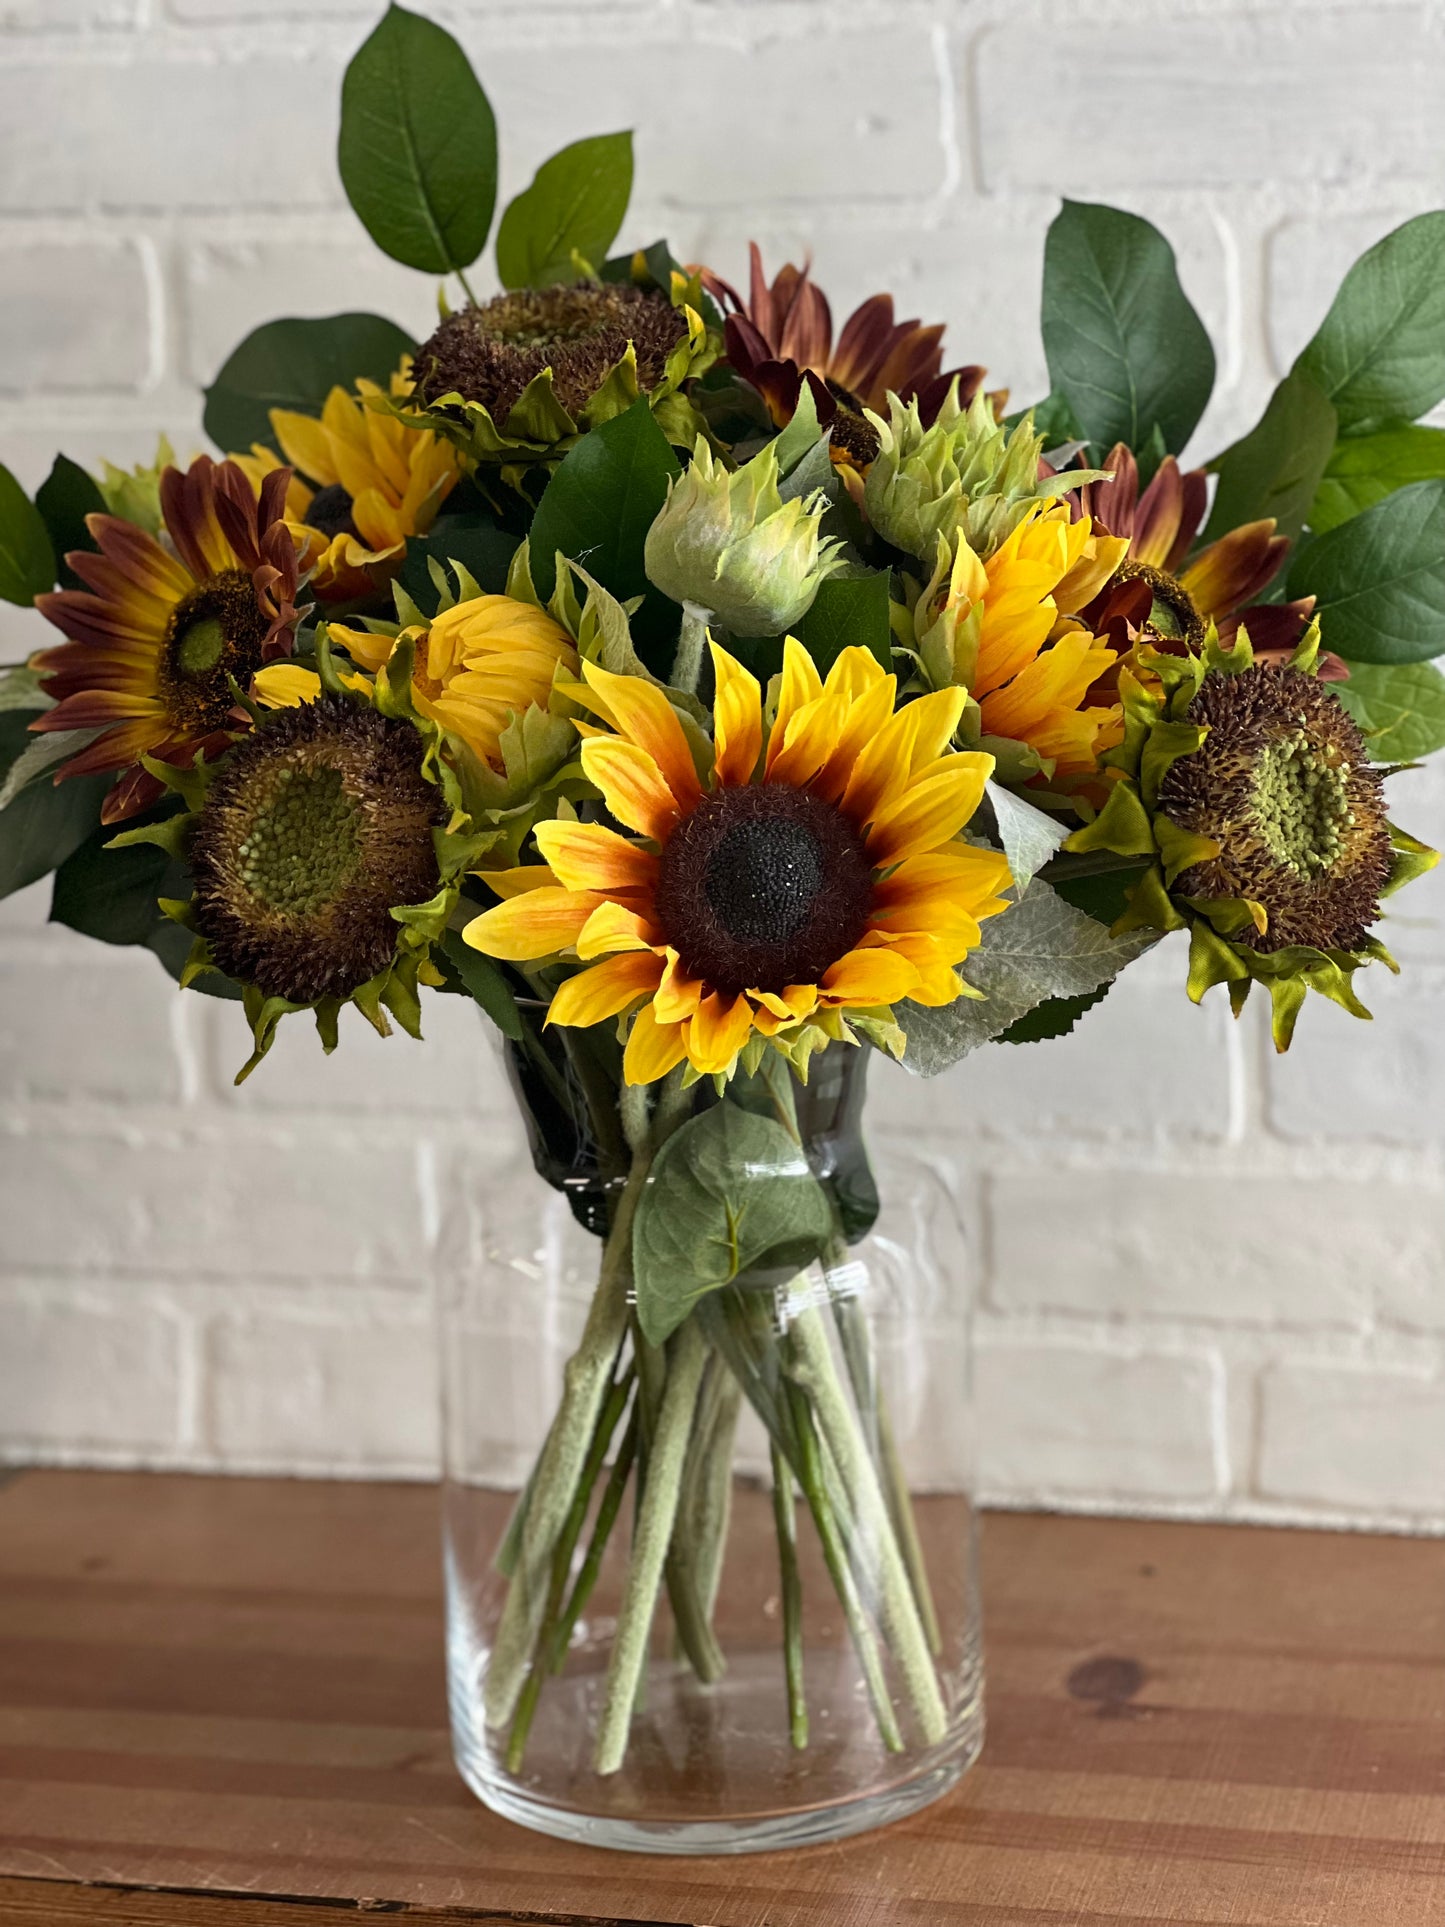 Load image into Gallery viewer, Sunflower Bouquet
